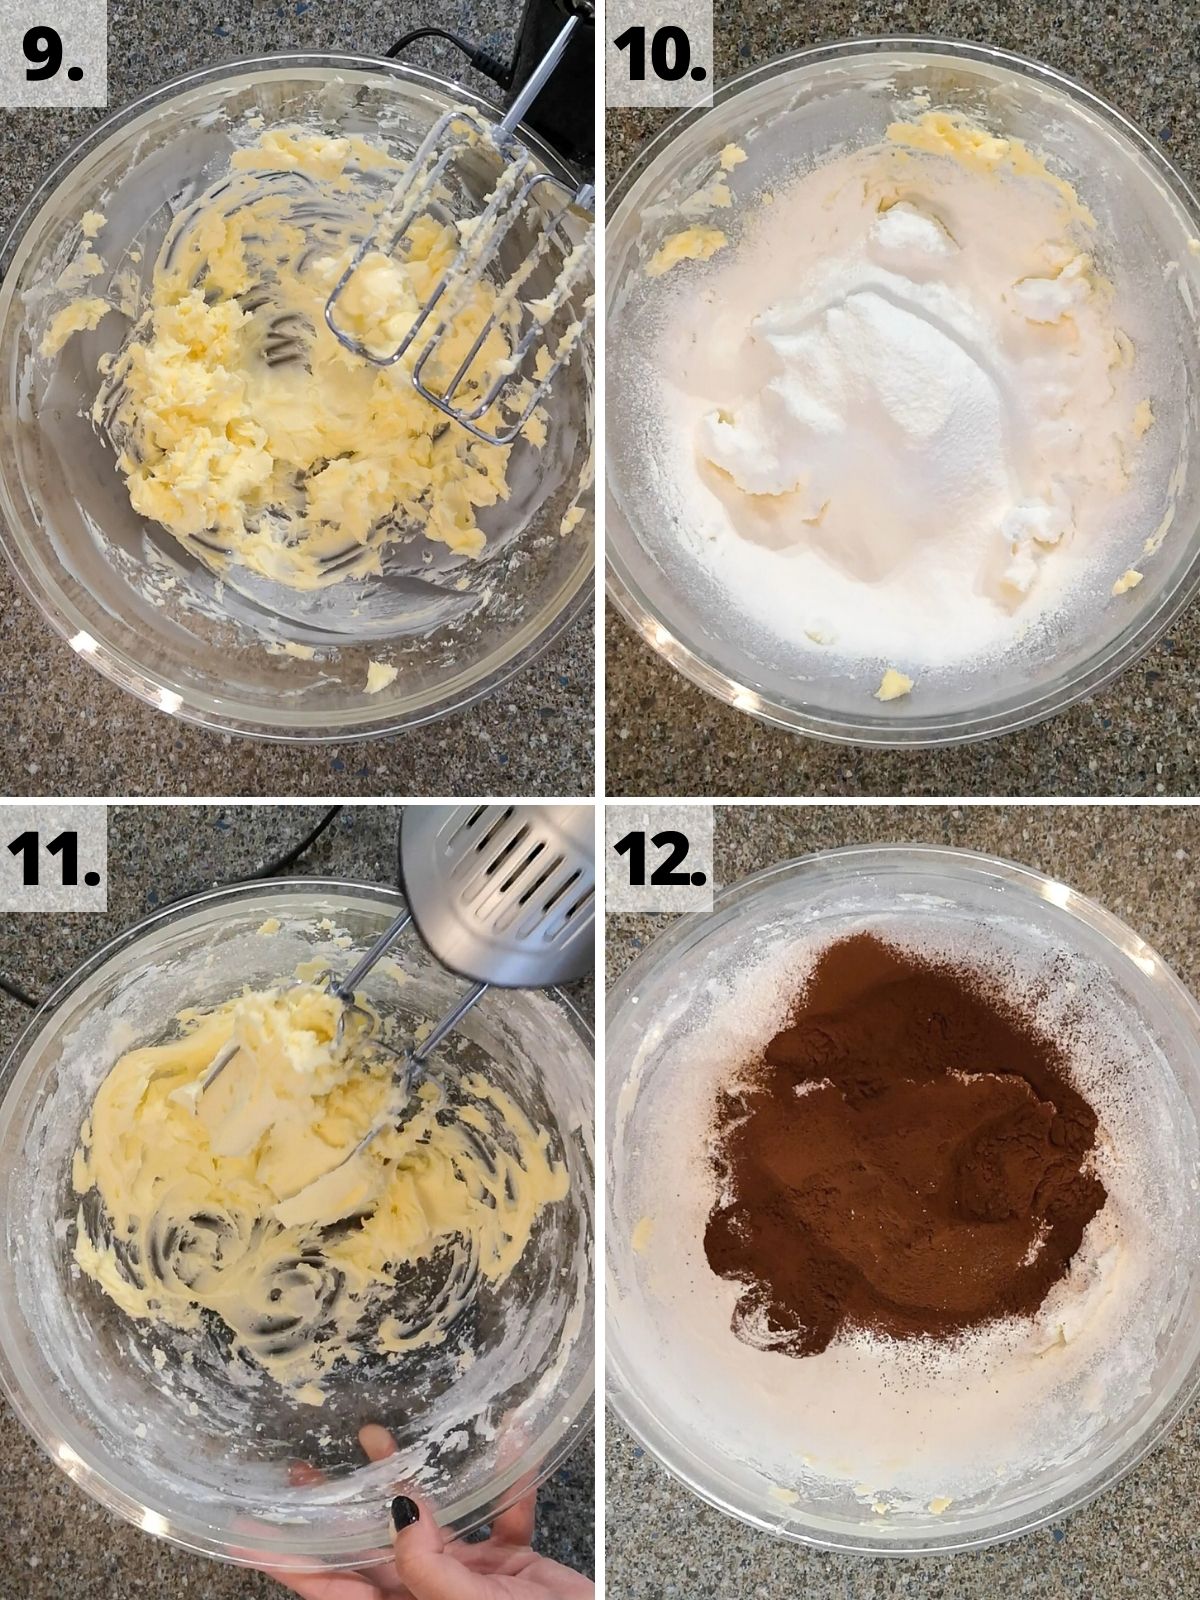 Chocolate cake recipe method steps 9-12 in a grid